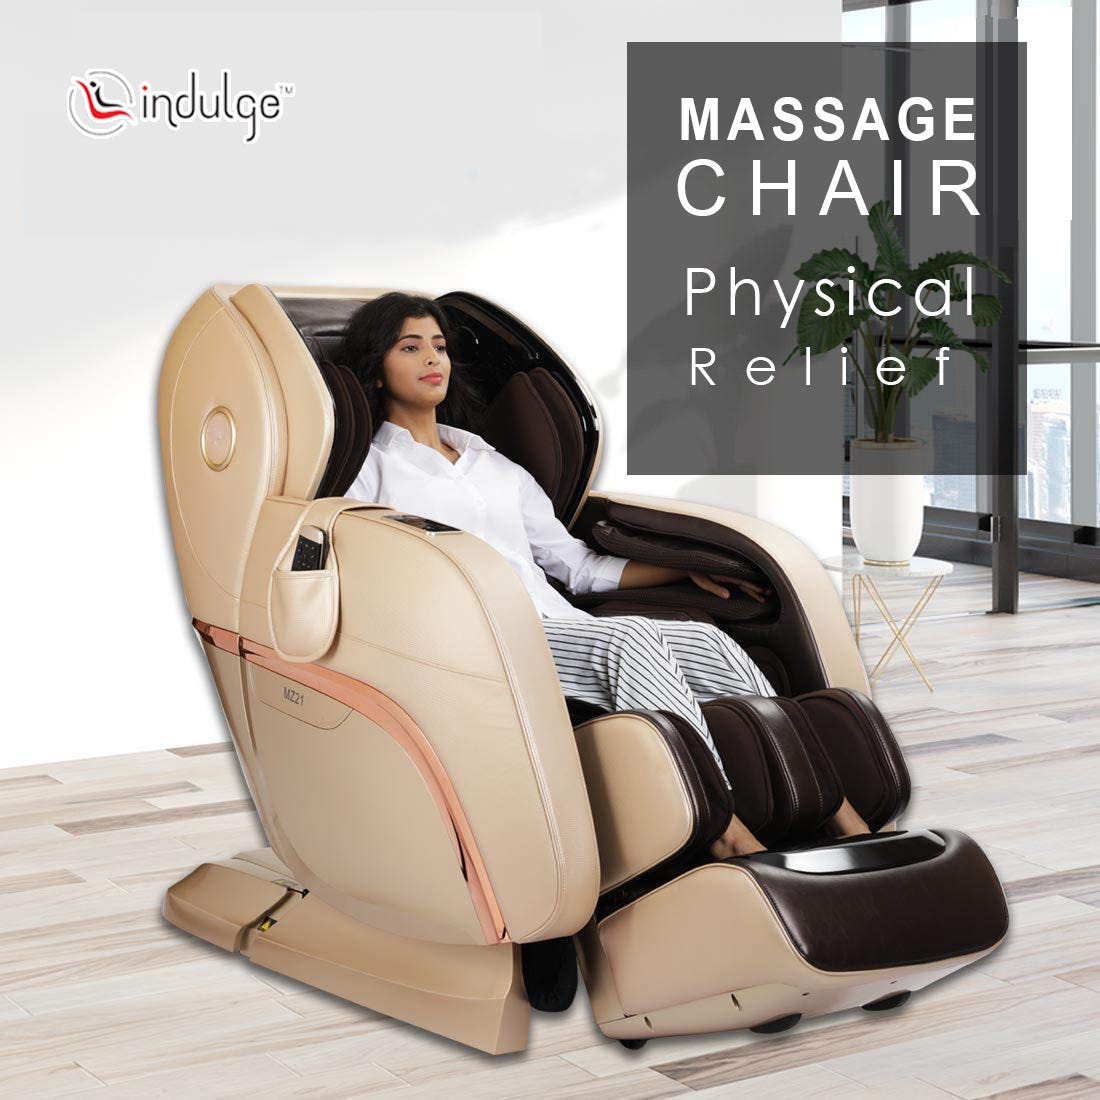 Physical Relief Is Not The Only Benefit Of A Massage Chair